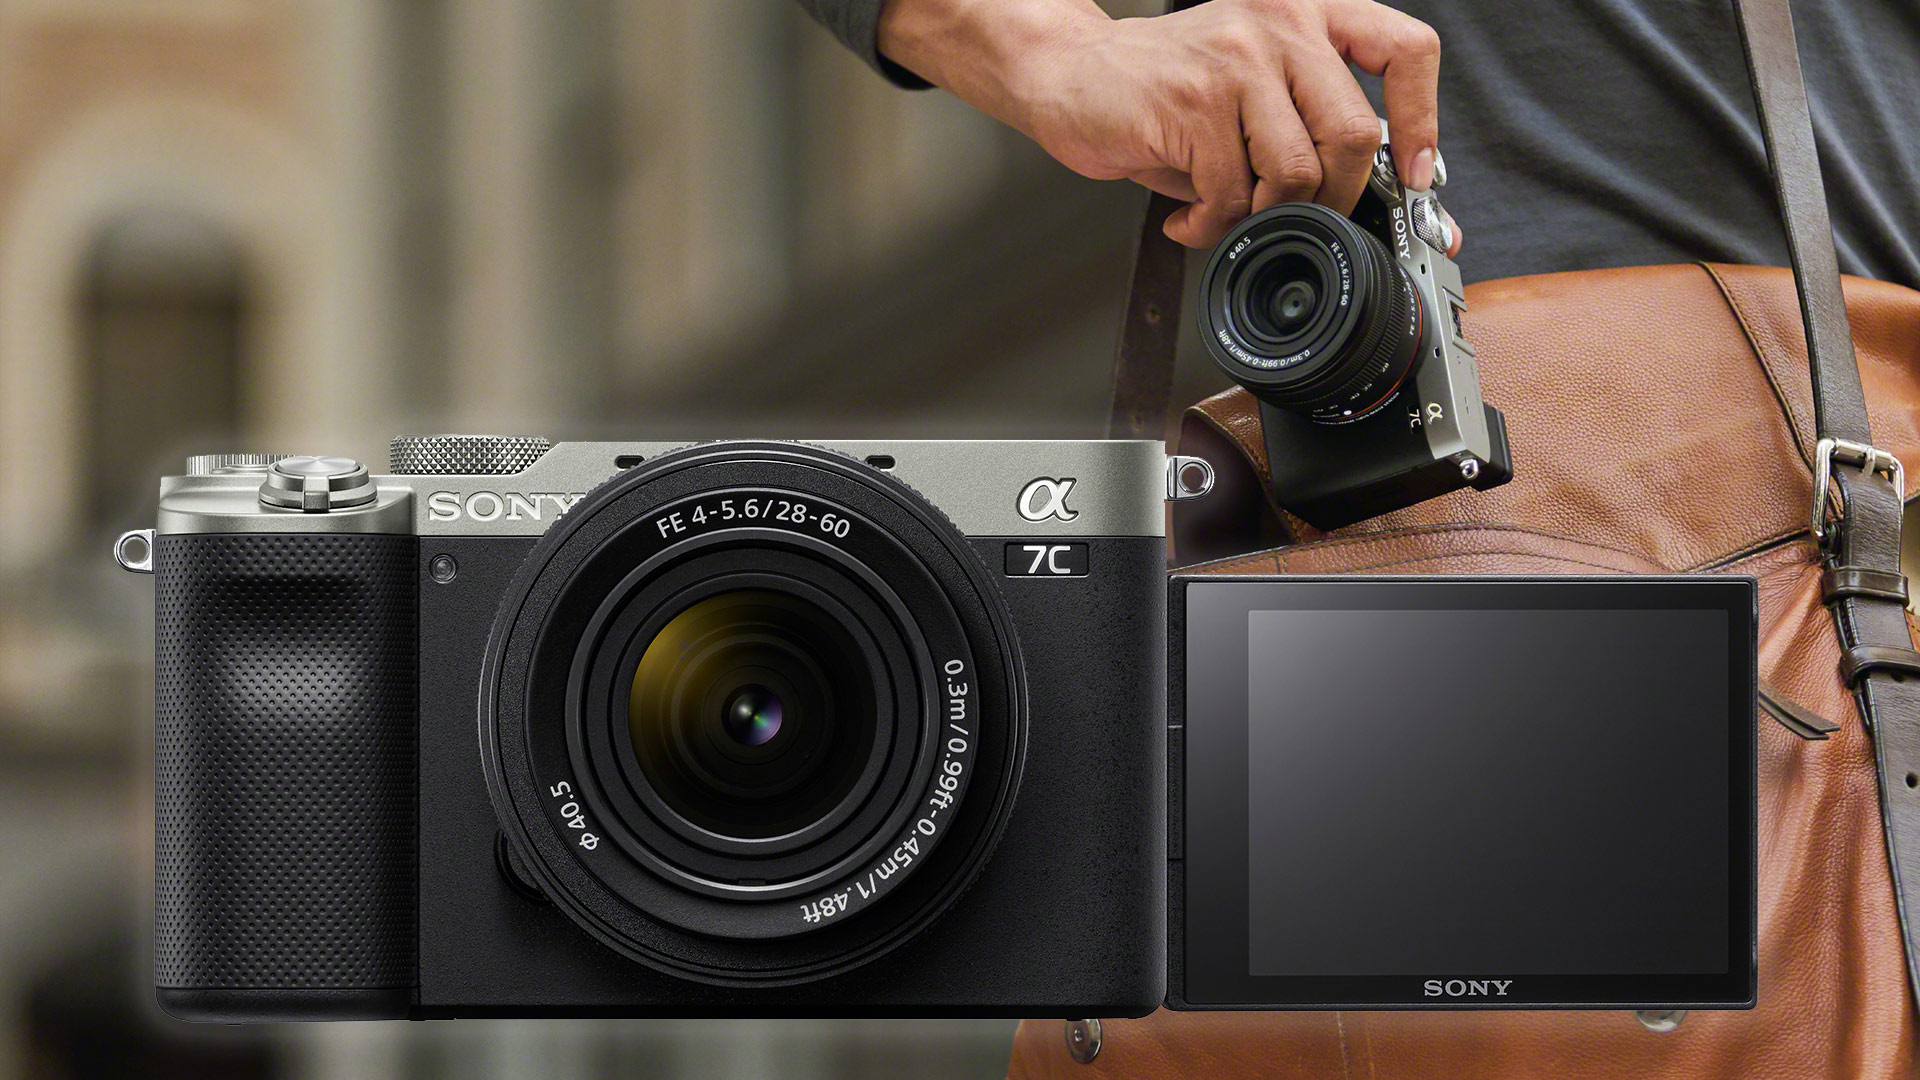 Sony a7C Announced The Most Compact Full-Frame Mirrorless Camera CineD